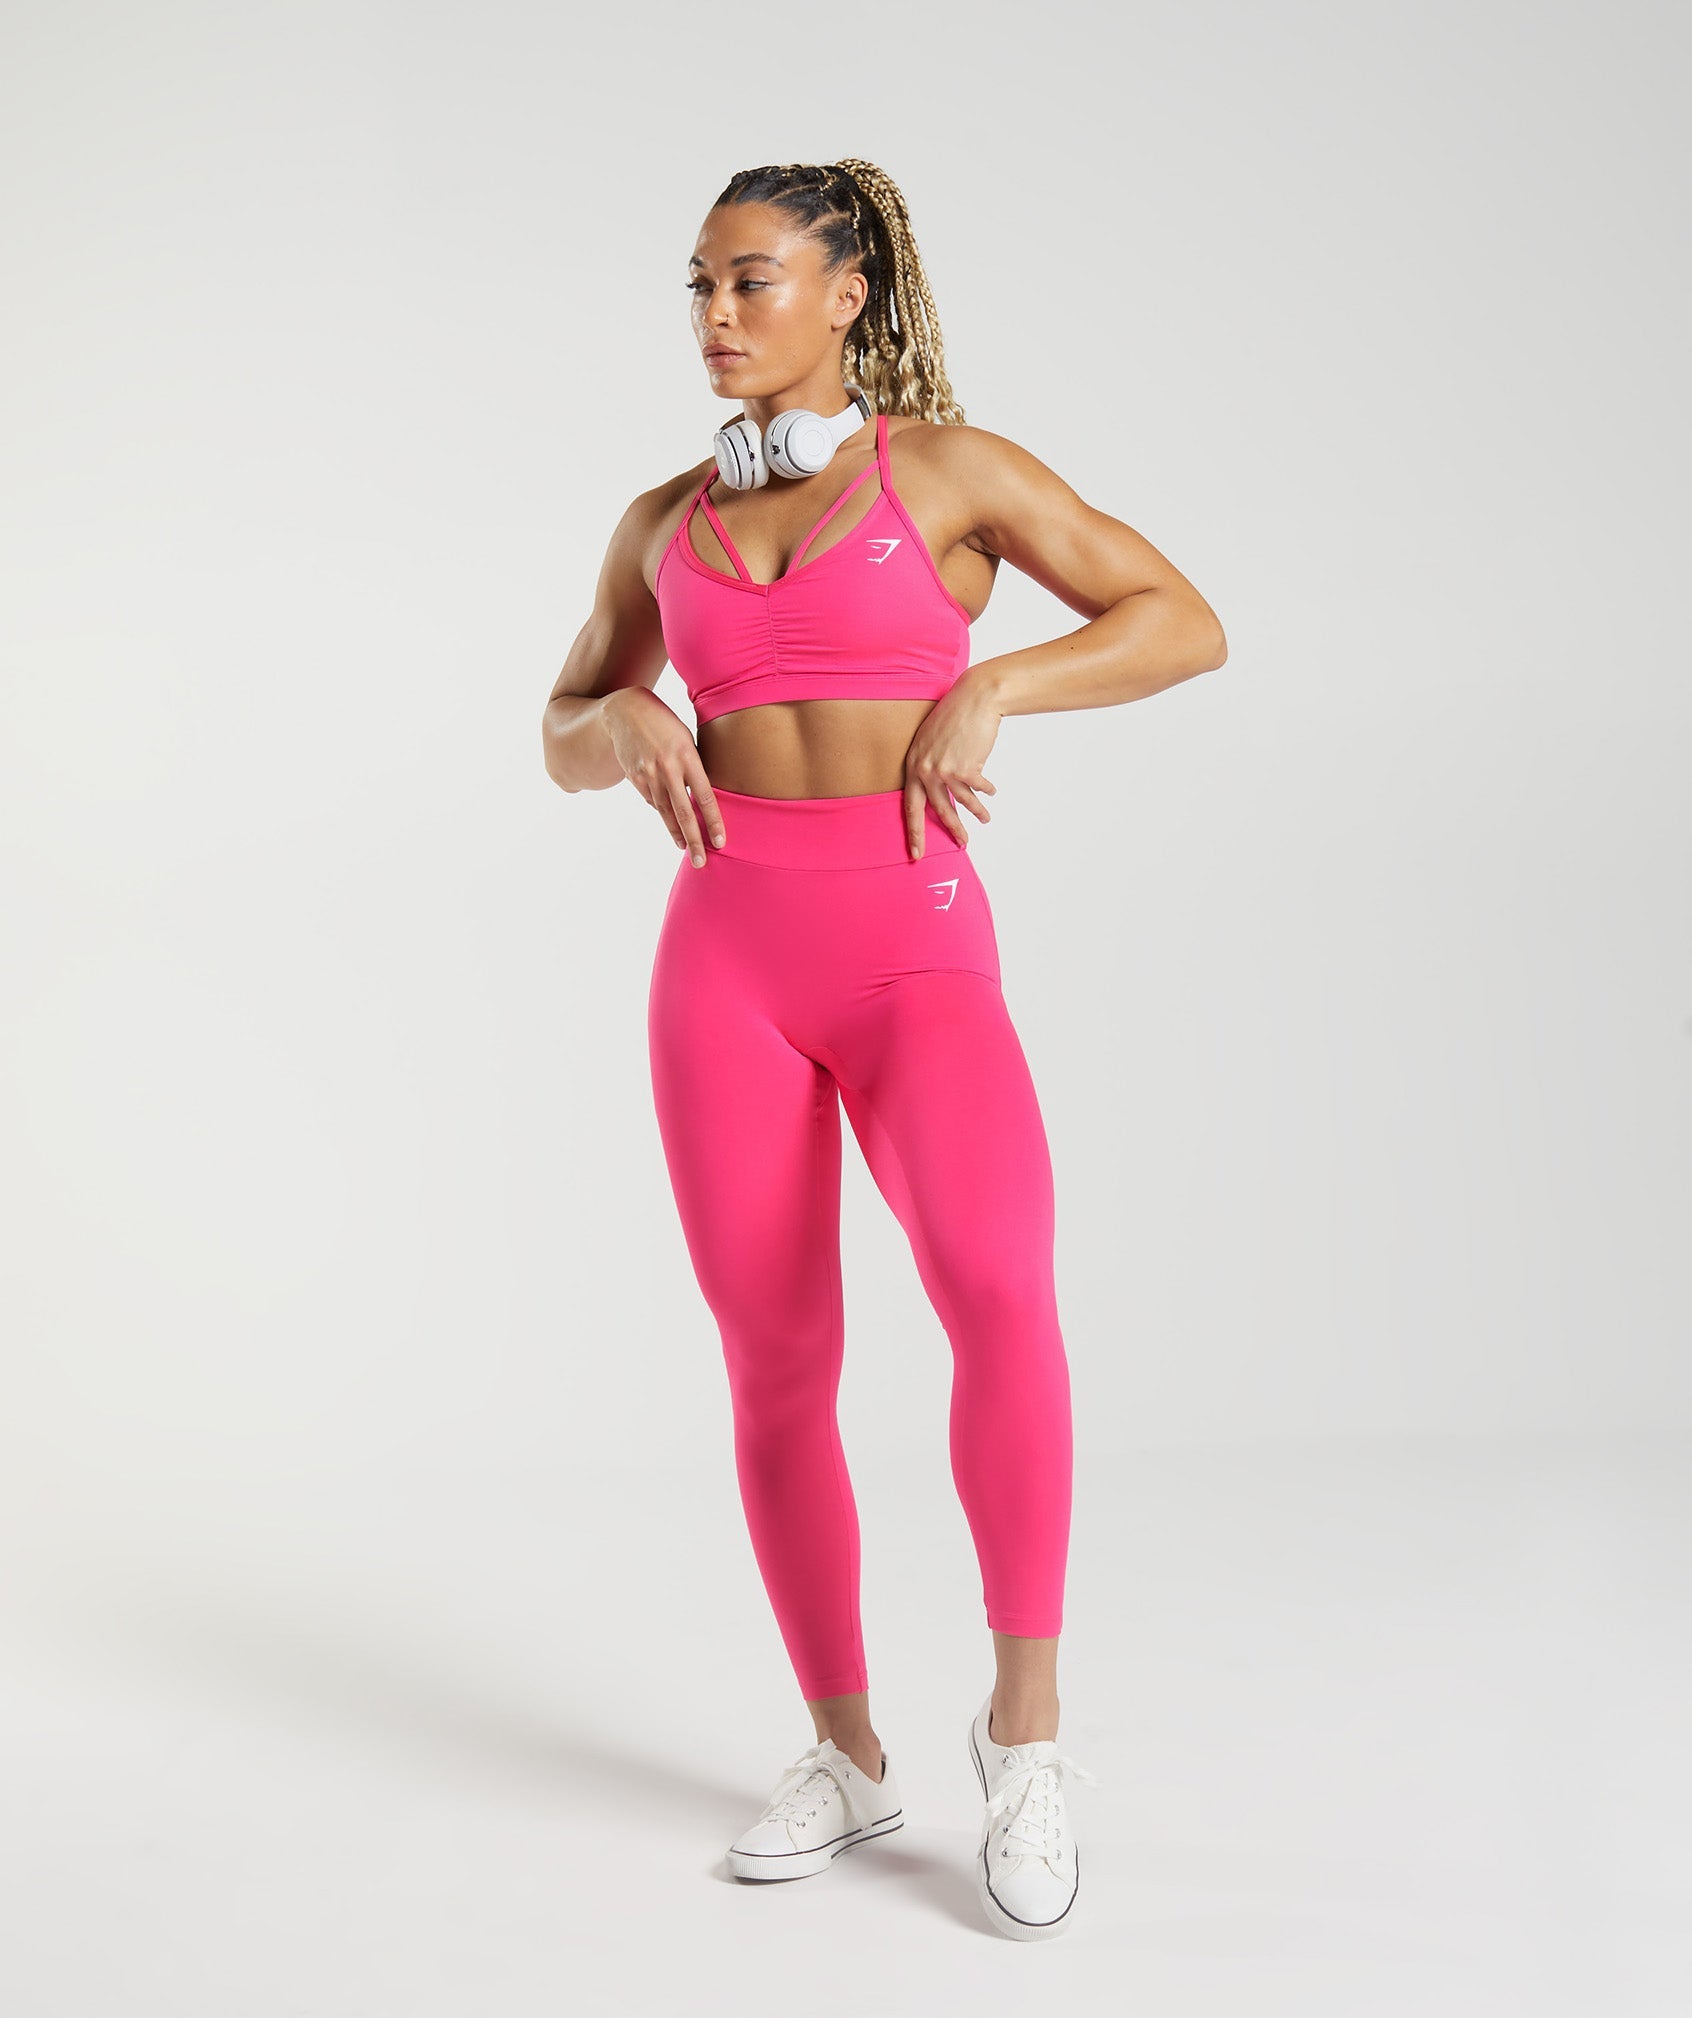 Pink Seamless Sport Set For Women Crop Top And Shorts Seamless Yoga Suit  For Active Fitness And Gym Workouts 220616 From Linjun05, $9.52